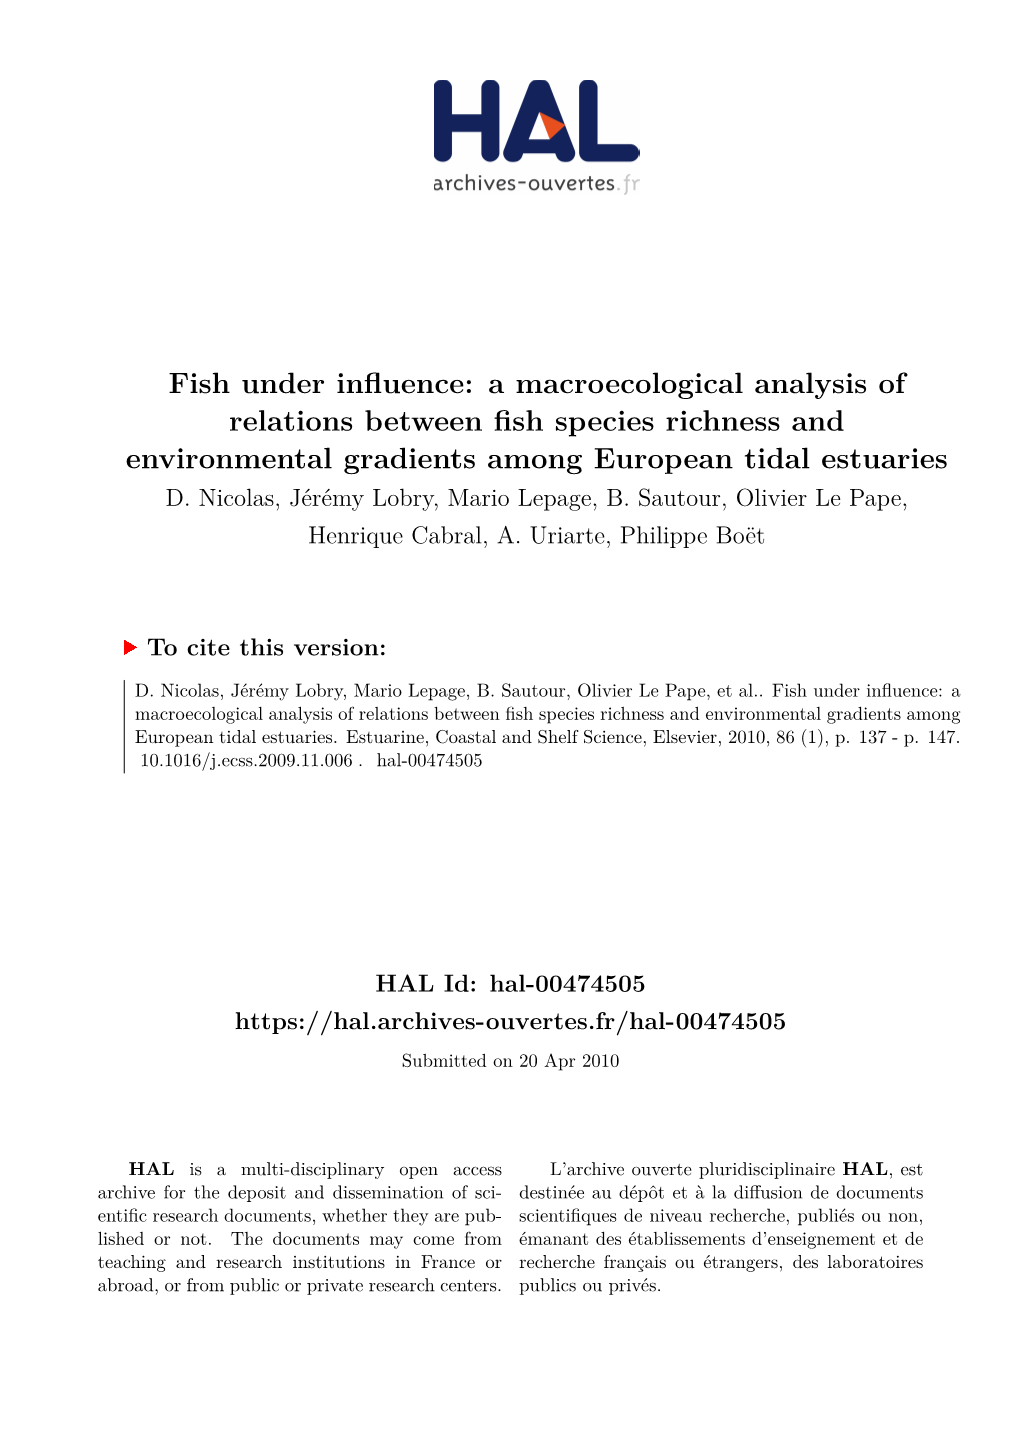 A Macroecological Analysis of Relations Between Fish Species Richness and Environmental Gradients Among European Tidal Estuaries D